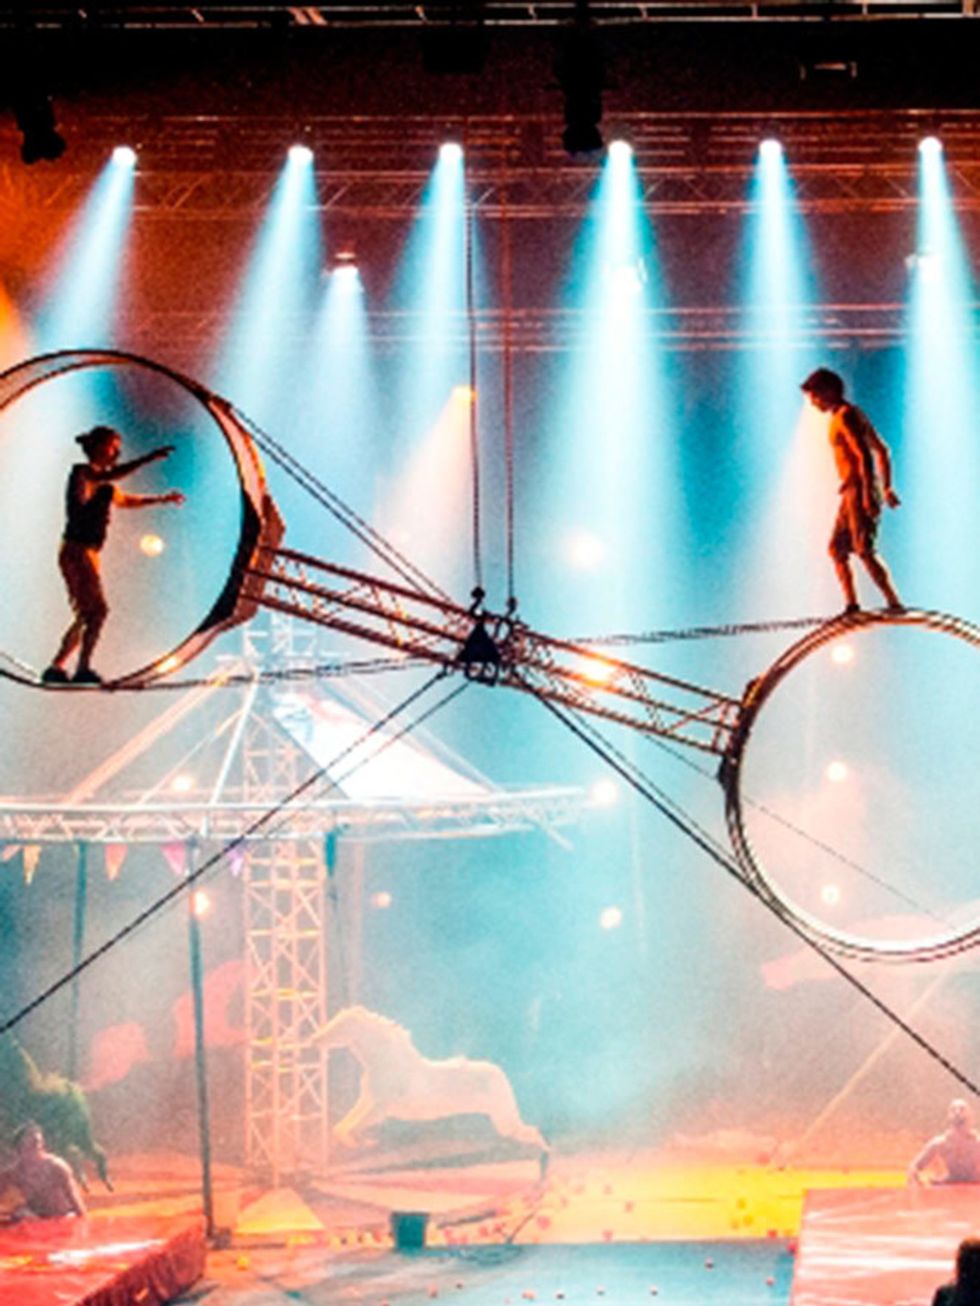 <p>FESTIVAL: CircusFest 2016</p>

<p>If we had to choose one word to persuade you to get down to Camdens Roundhouse this month, wed go with: ACROBATS. Closely followed by cabaret, tightrope-walkers, parkour, street theatre, aerial gymnastics And if the